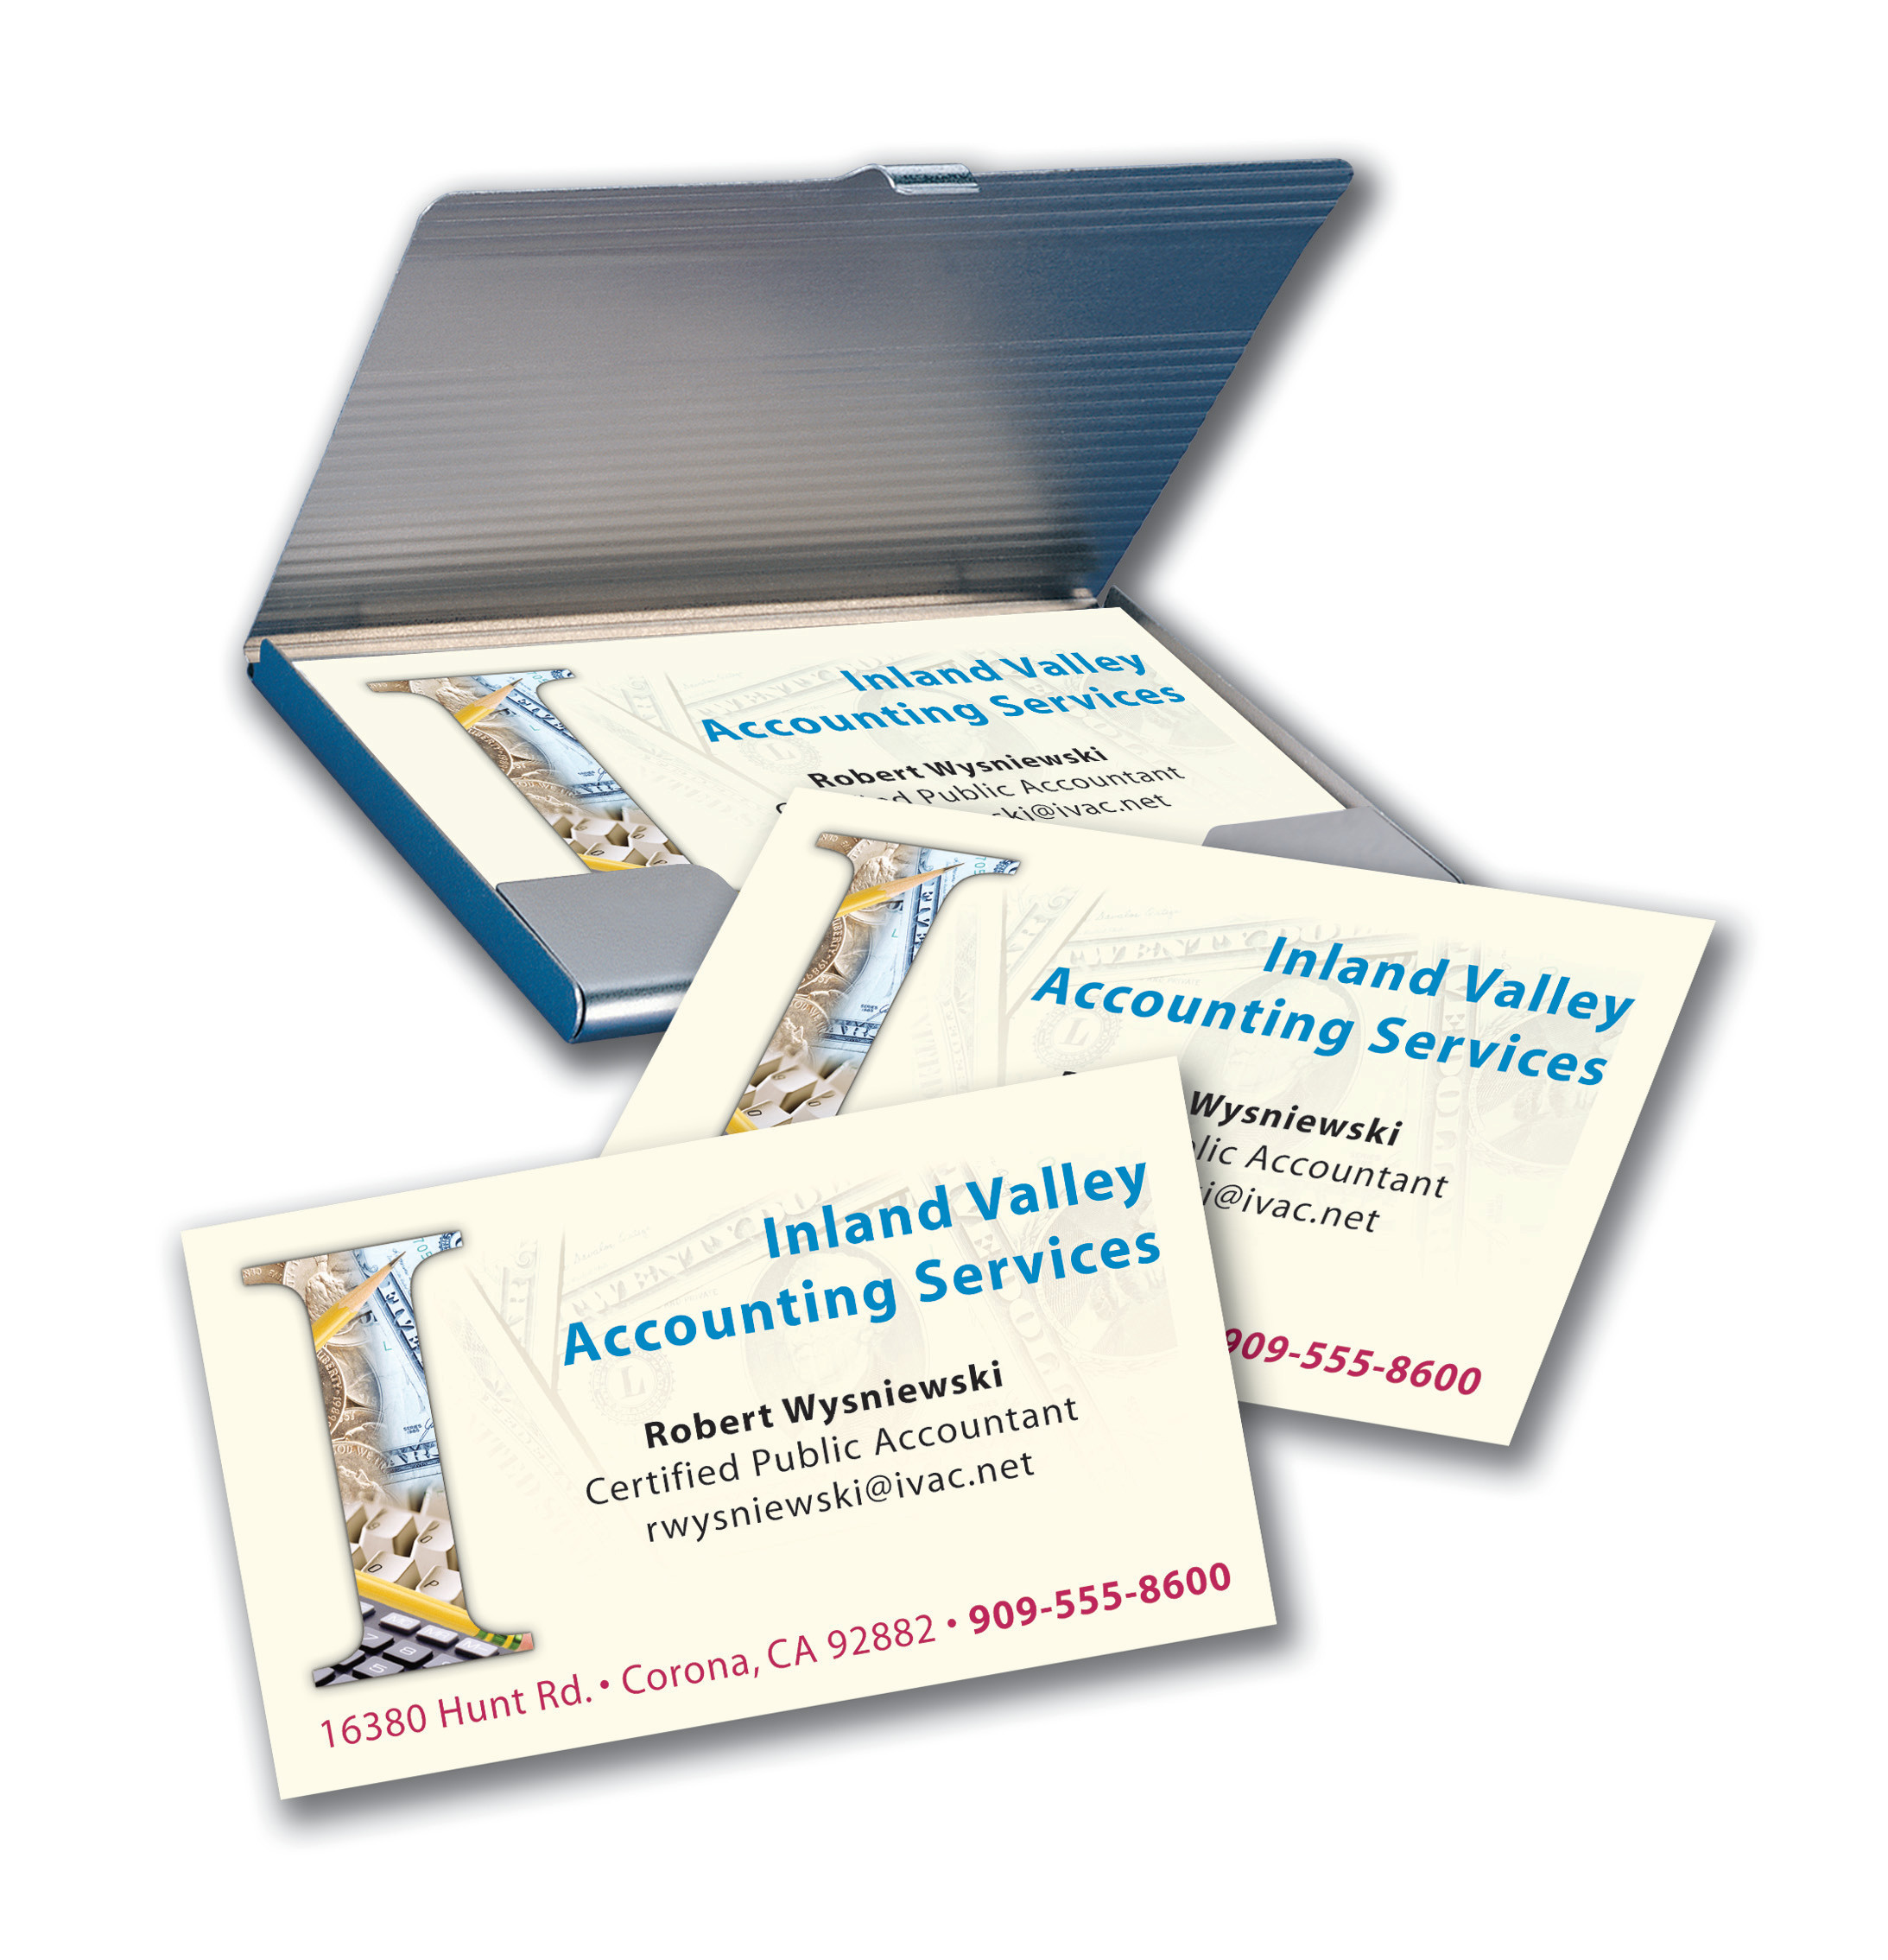 Avery Clean Edge Business Cards True Print Matte Two Sided Printing 2&quot; X 3 1 2&quot; 90 Cards Of 8.5 X 11 Business Card Template